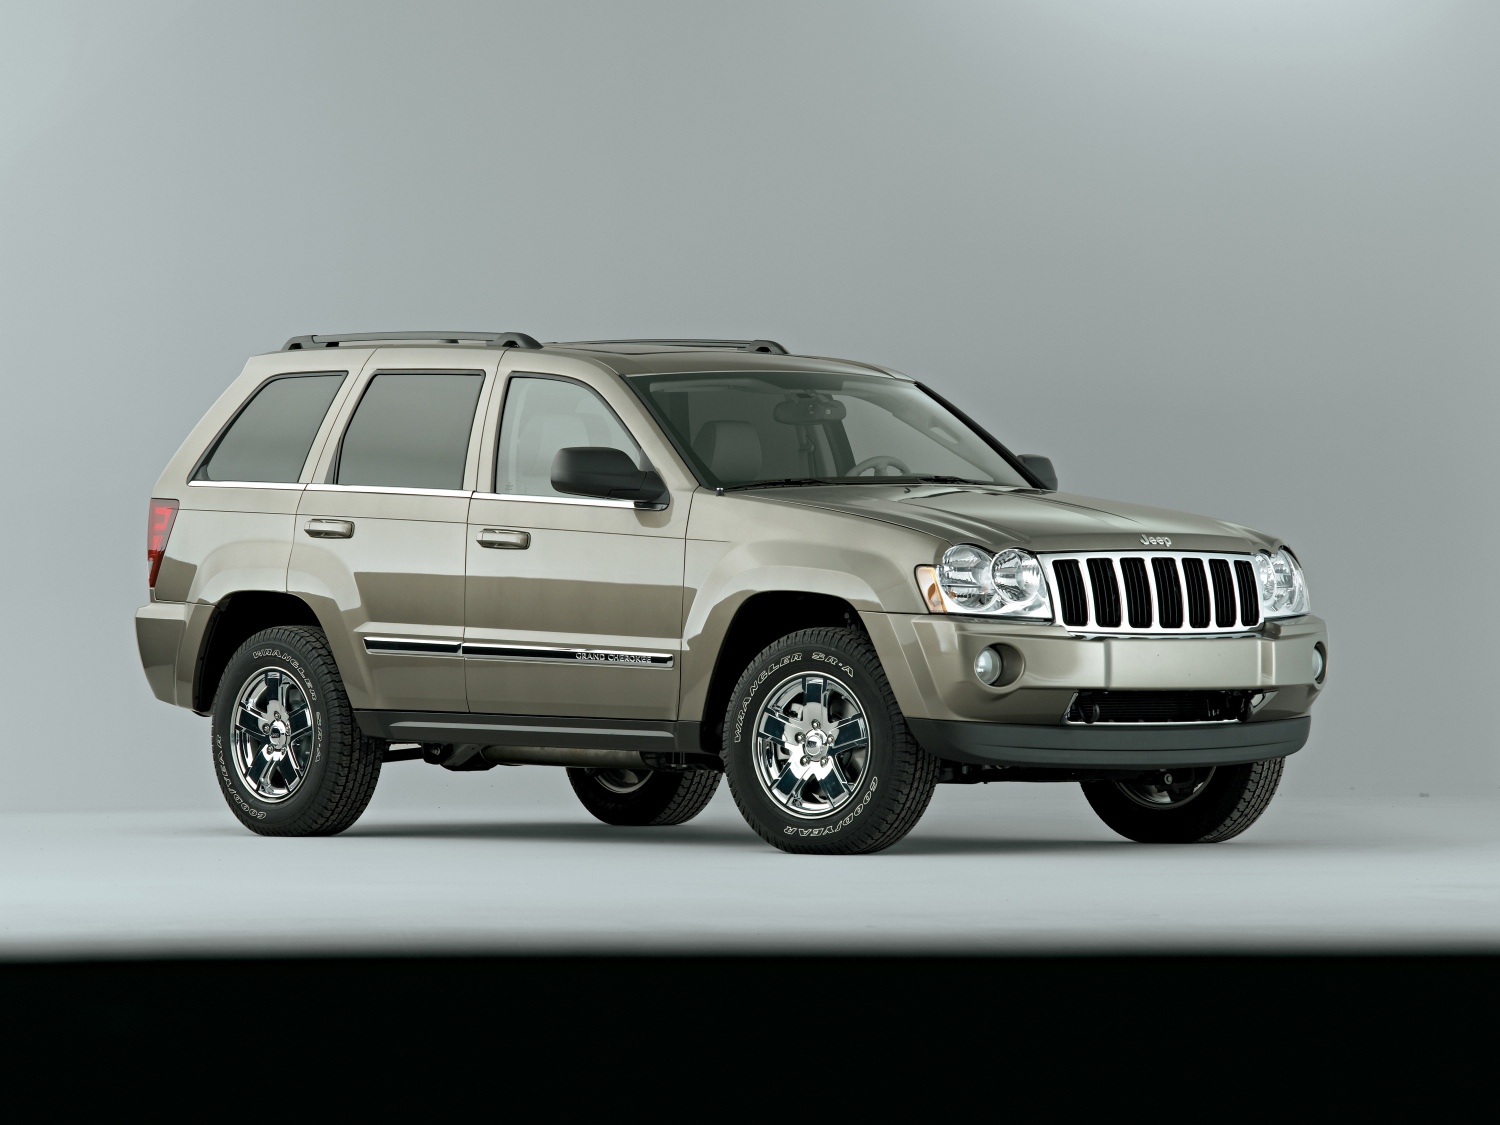 How Long Will a 2005 Jeep Grand Cherokee Last